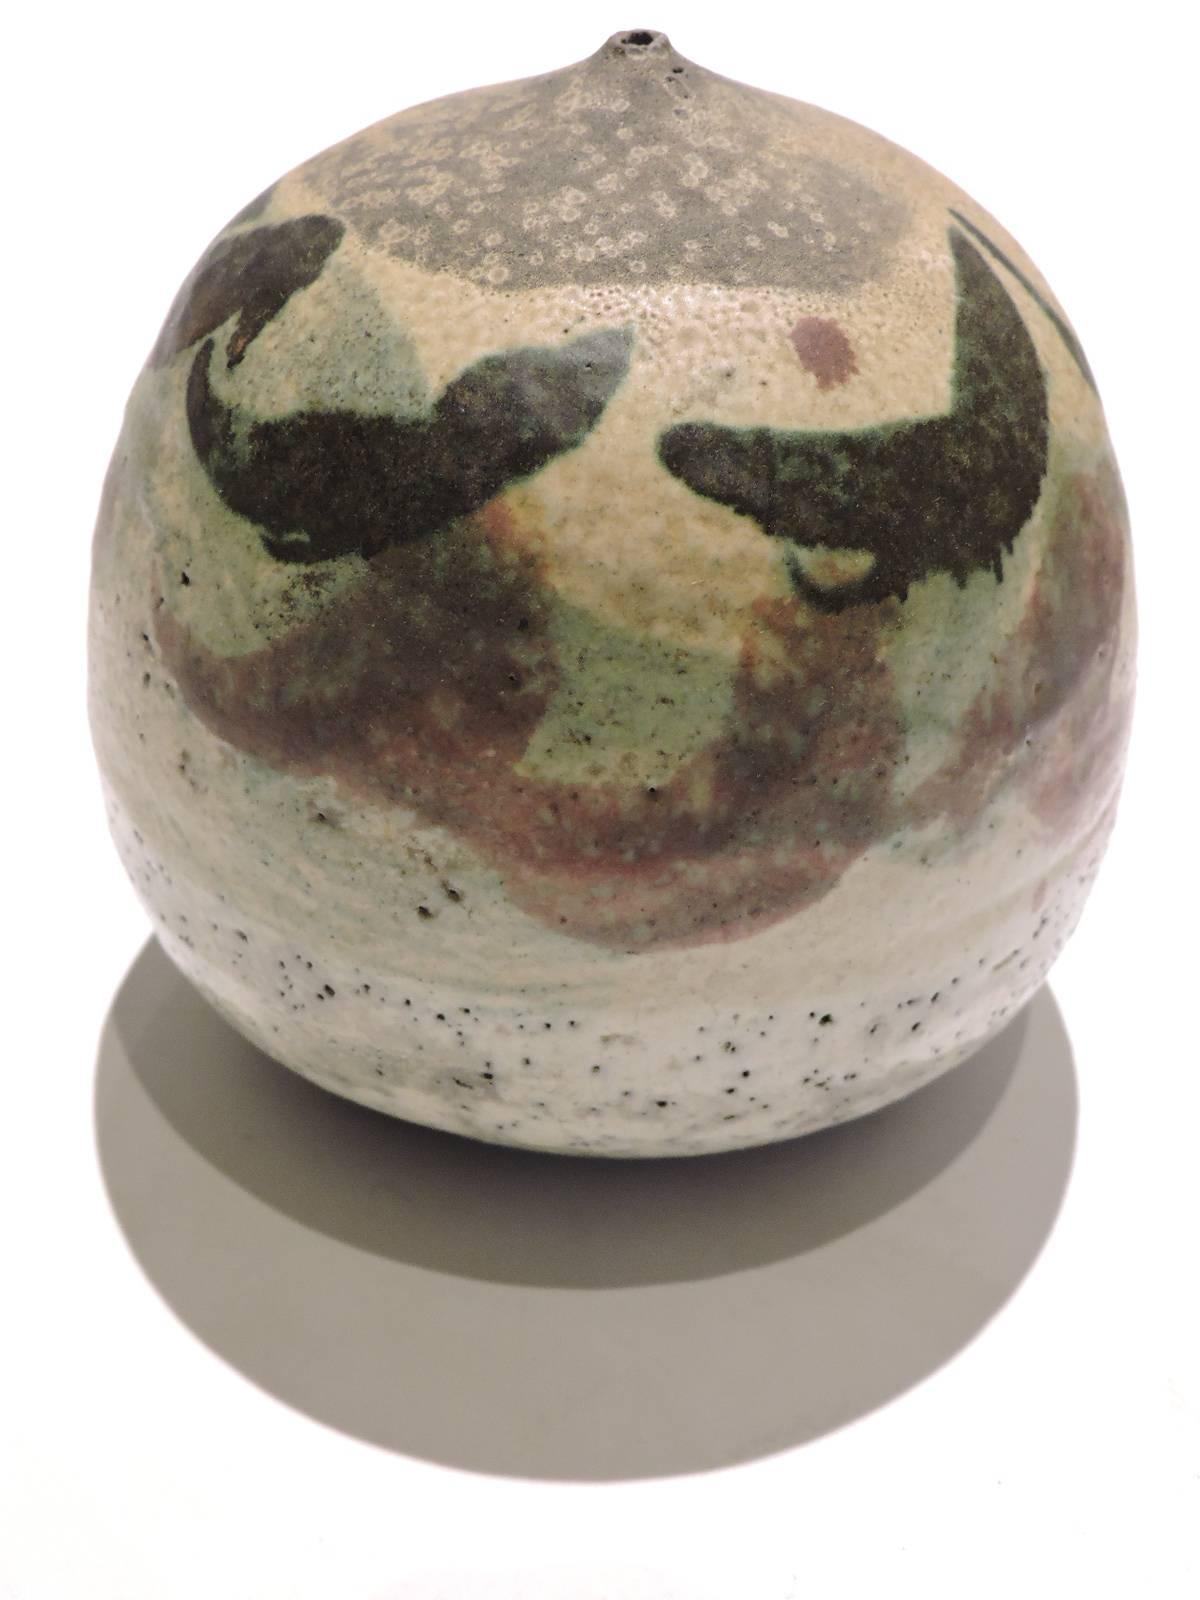 Two American studio Raku Pottery bulbous form weed pot vessels signed Nancy Jurs 1973 - both pieces in great vintage condition with a beautiful rich iridesence to glaze